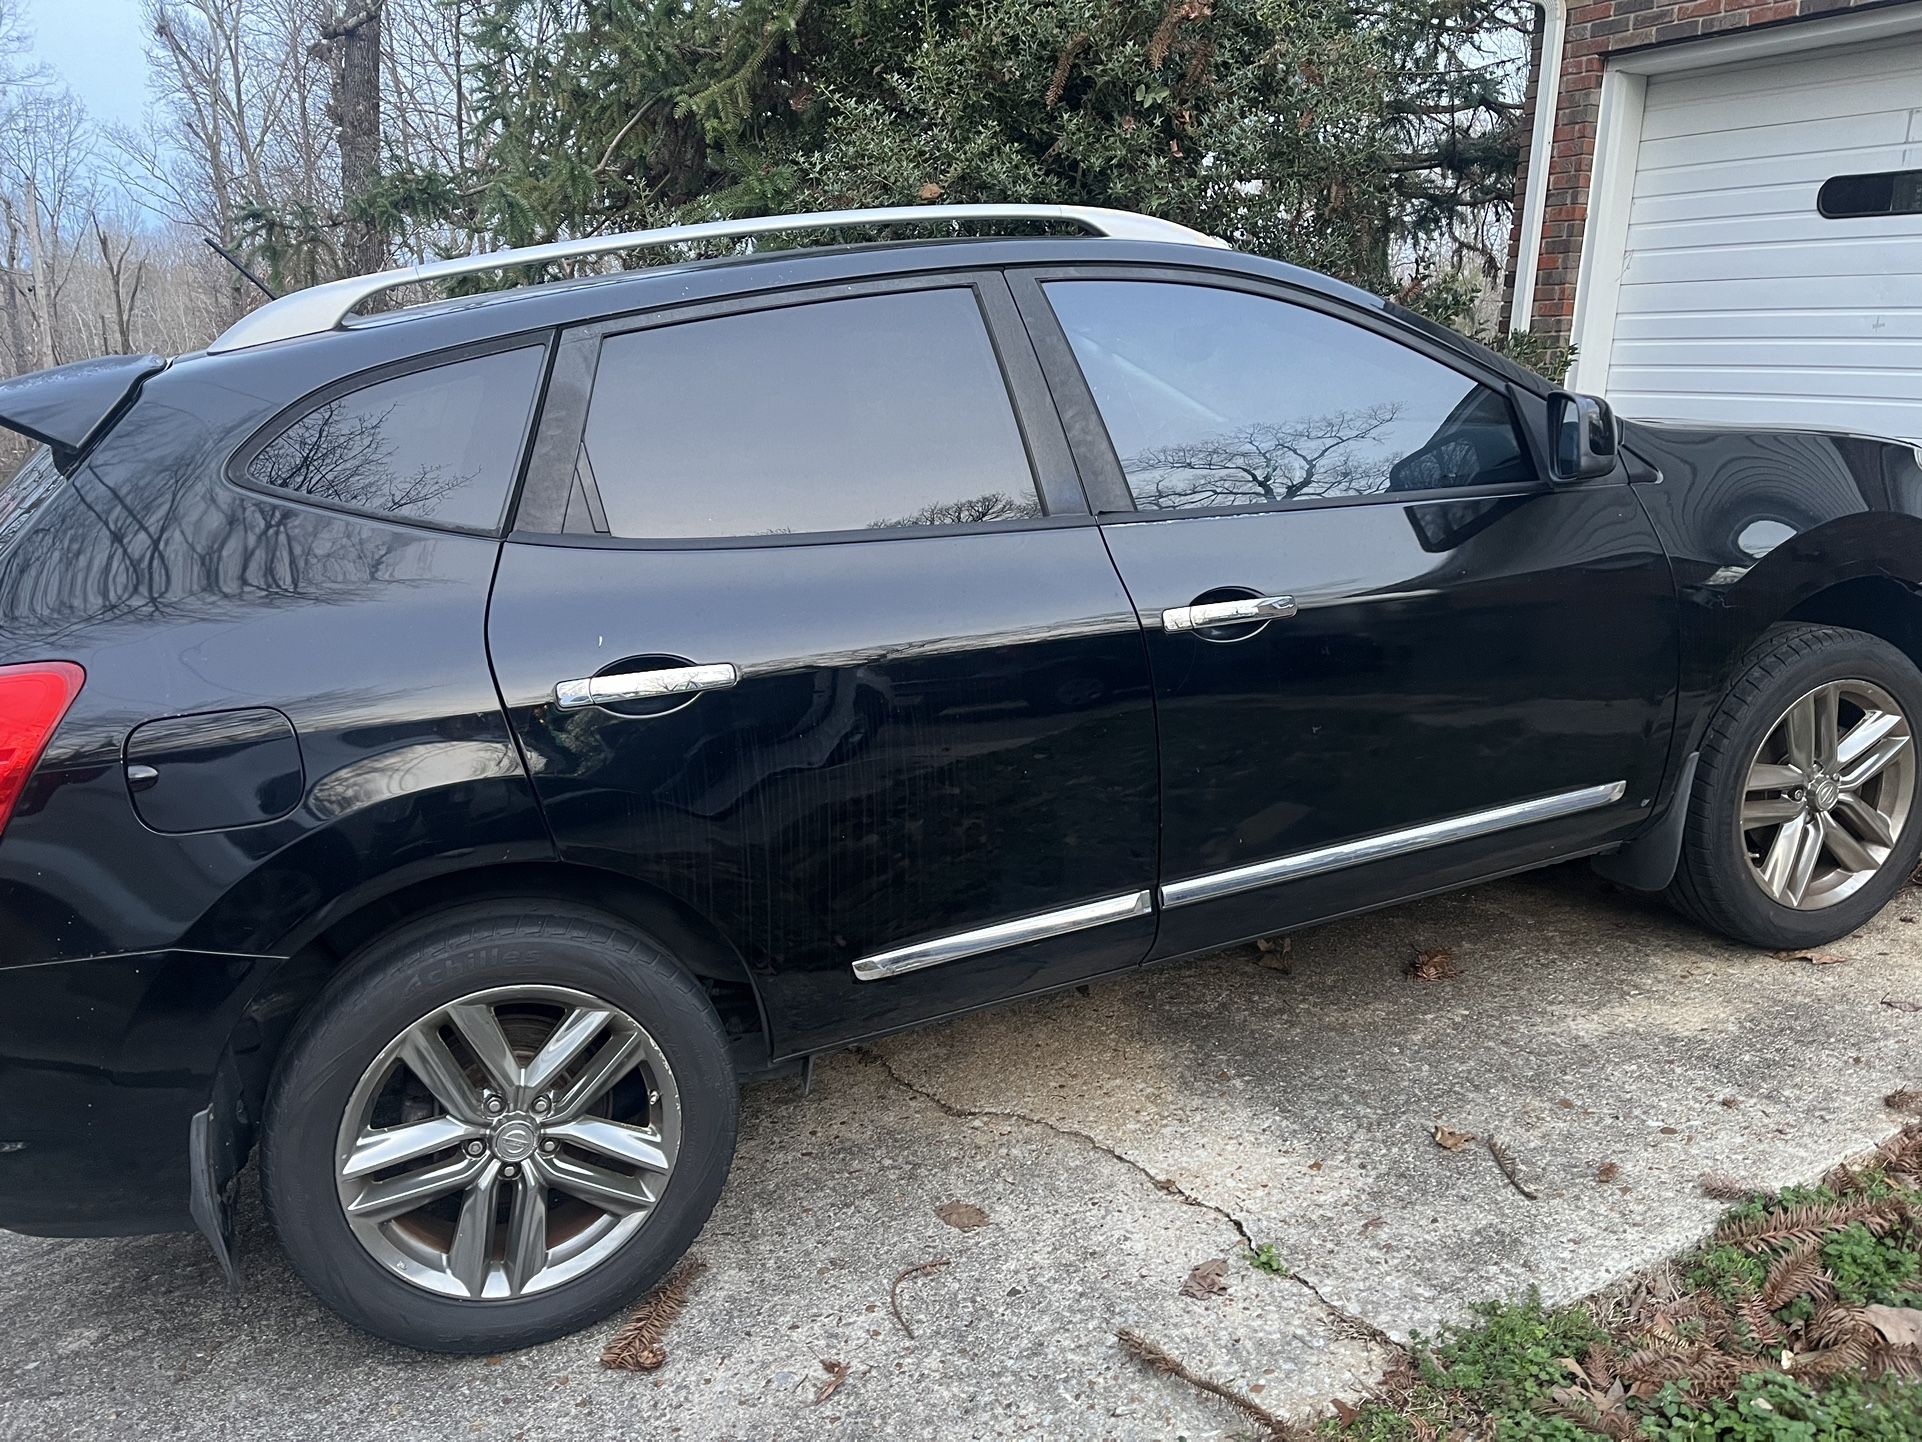 Black SUV car For Sale Nissan Rogue Runs Perfect & Mint Condition Leather Interior 